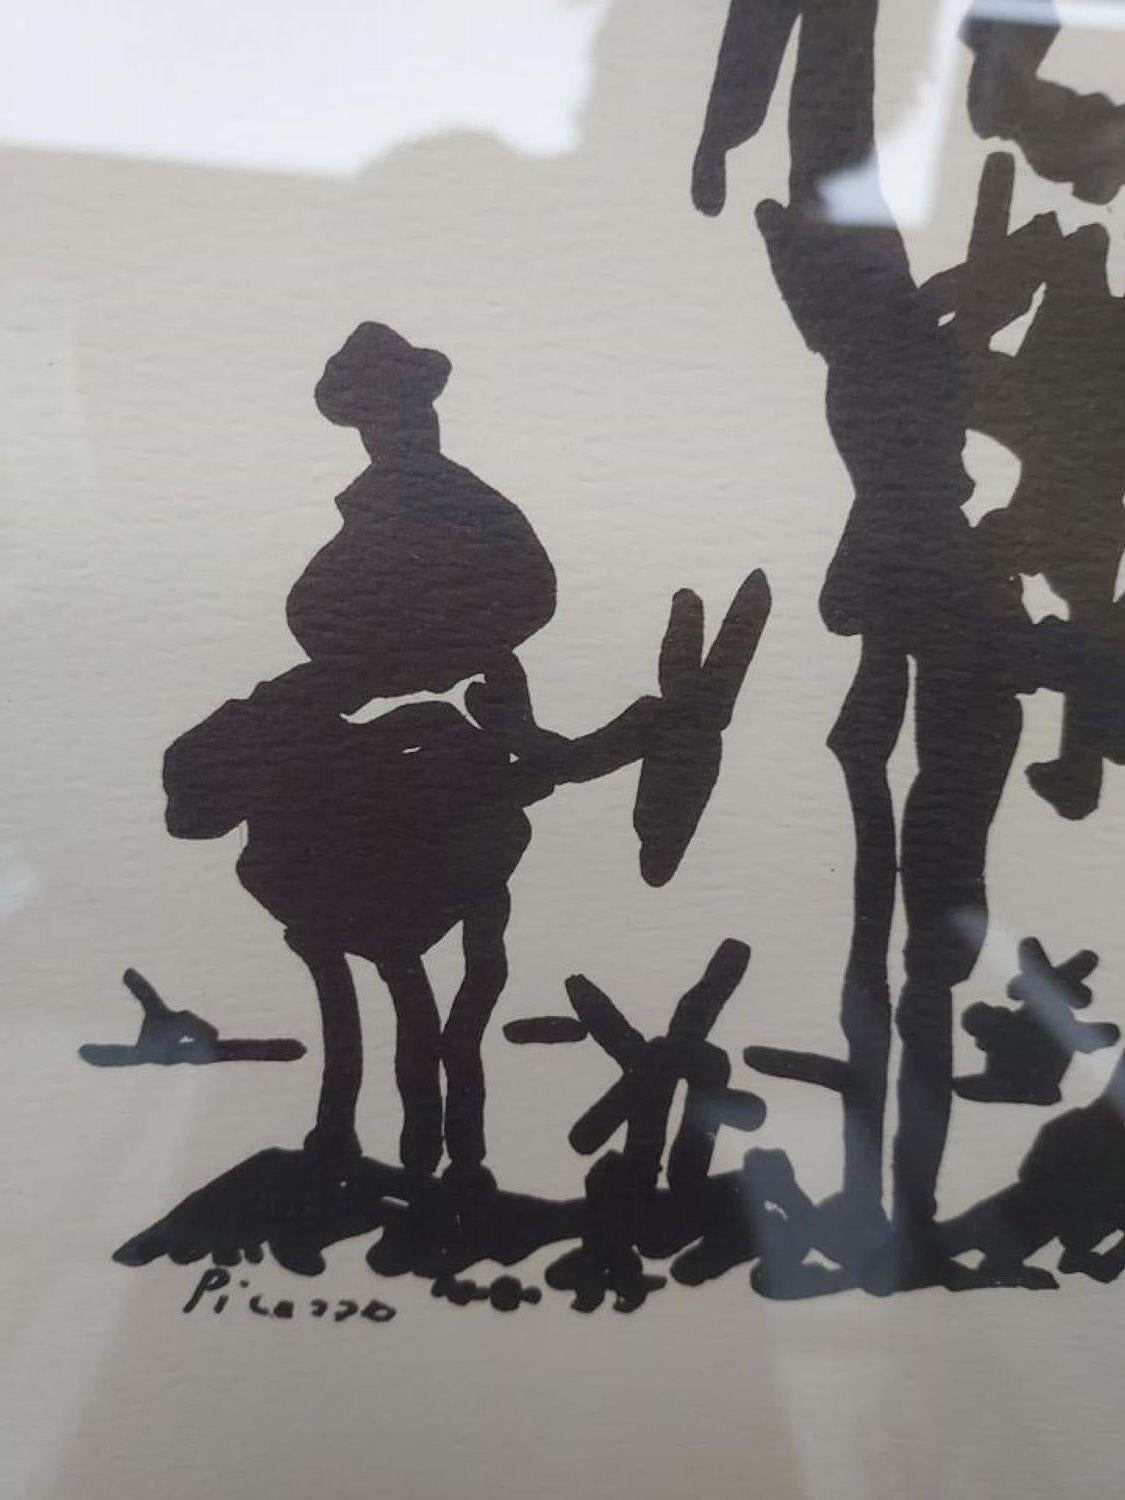 why did picasso paint don quixote